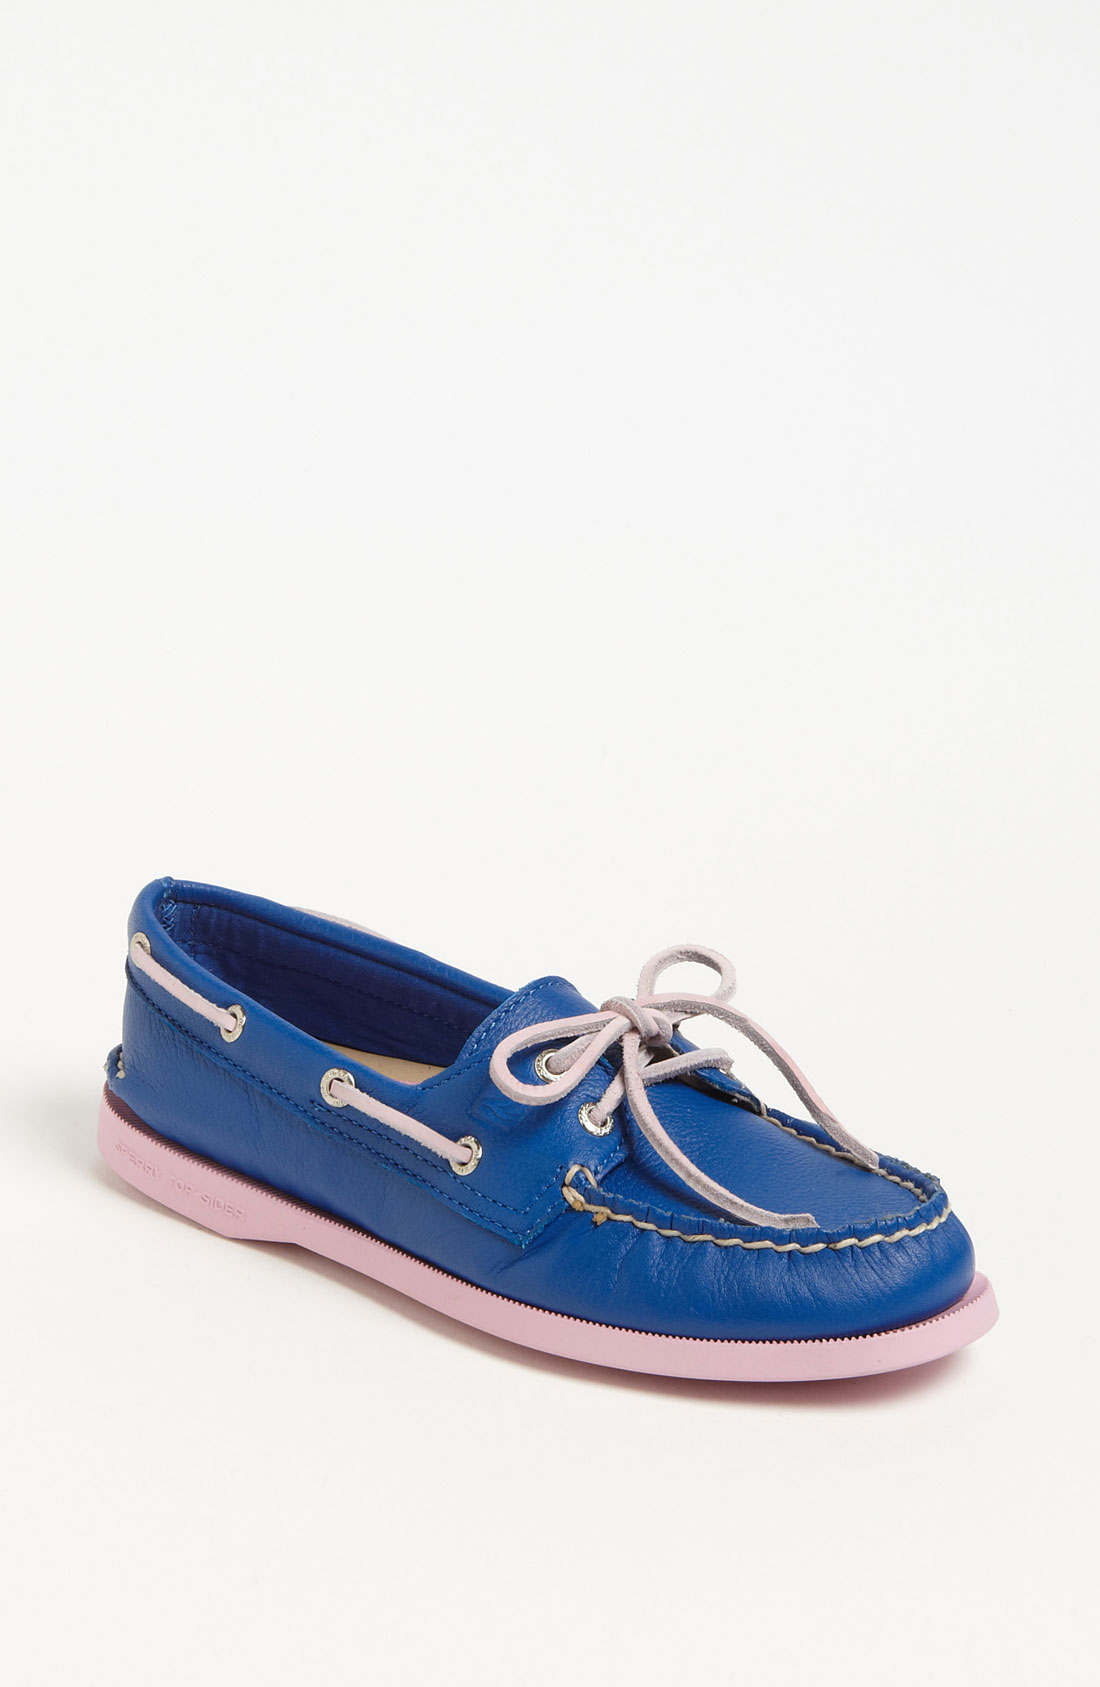 Sperry Top-sider Authentic Original Leather Boat Shoe in Blue (blue ...